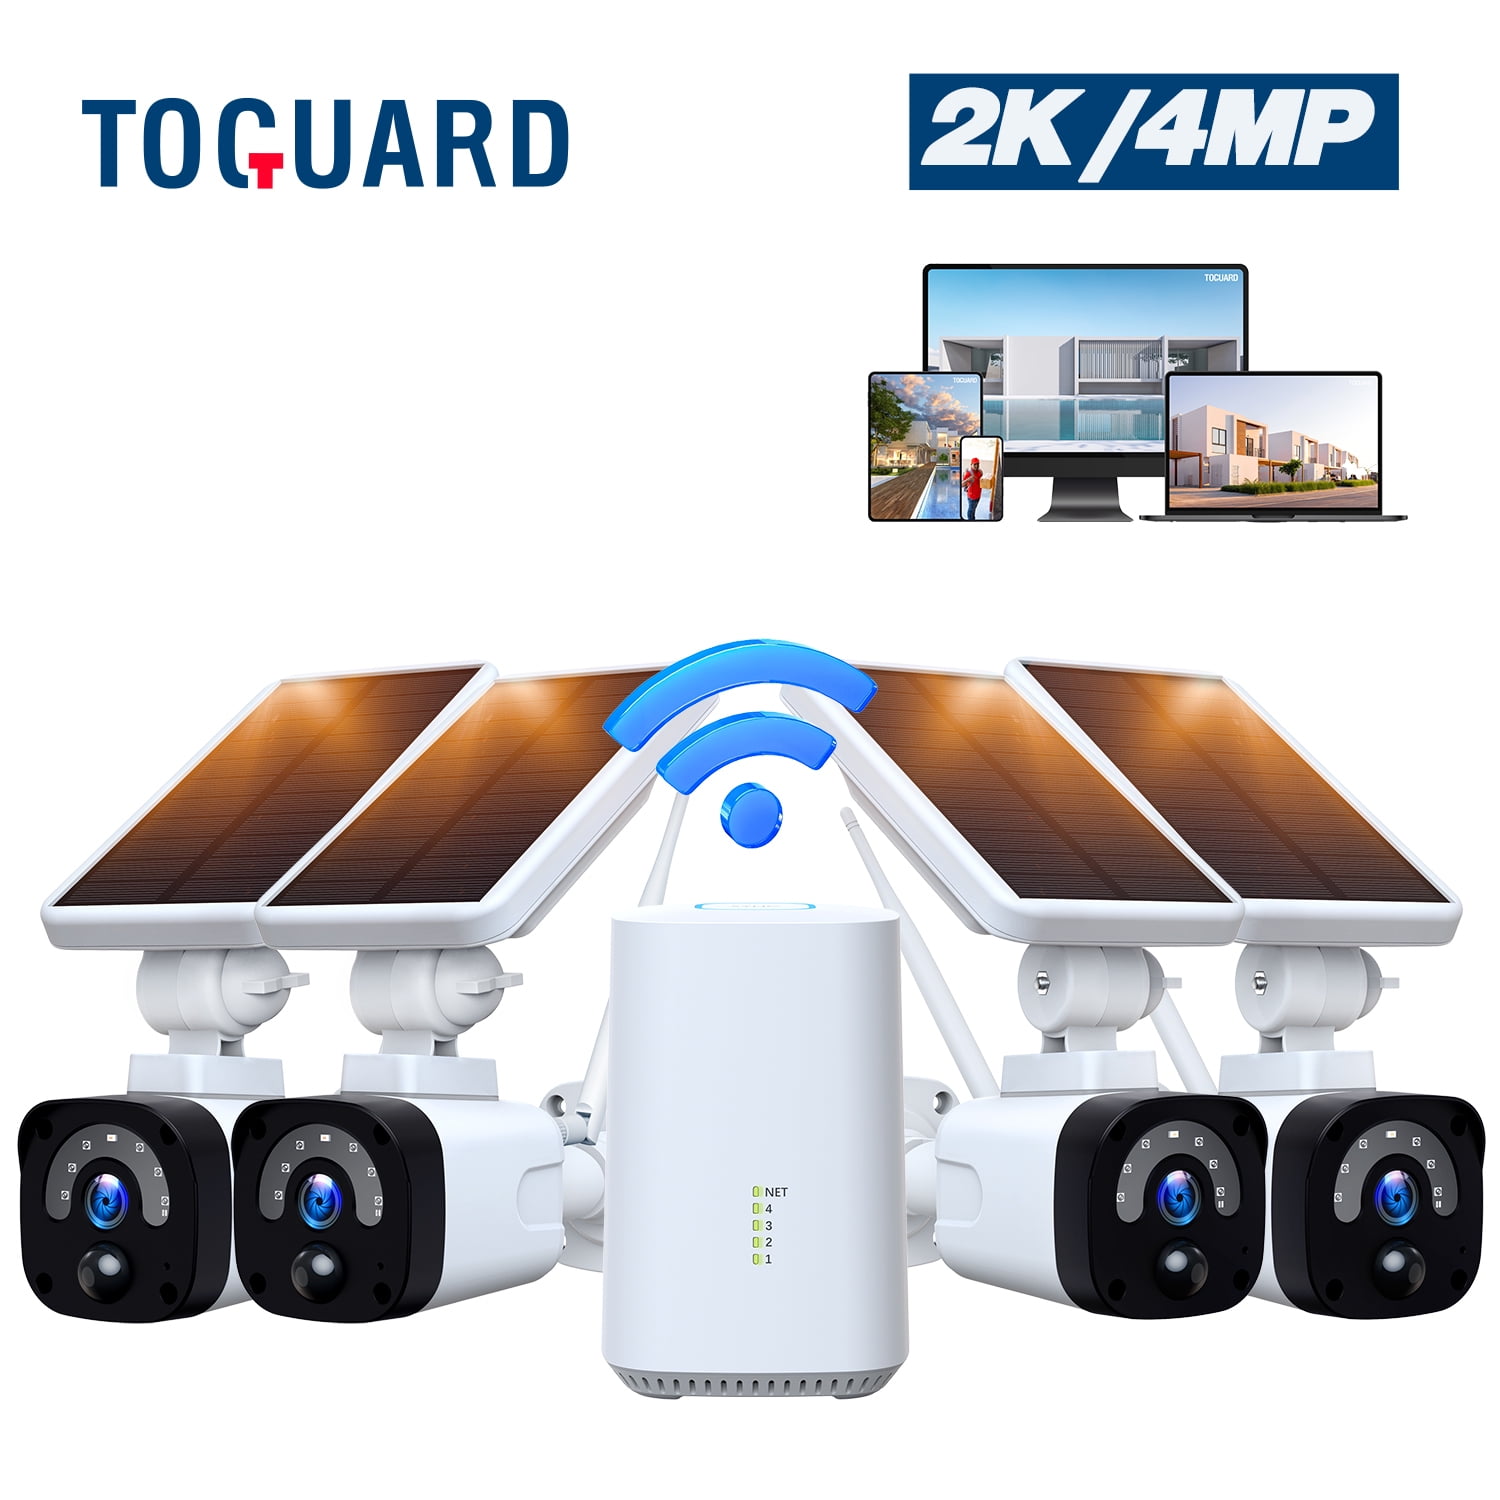 TOGUARD 3MP Solar Wireless Outdoor Security Camera System with Base Station, CCTV Camera Security System